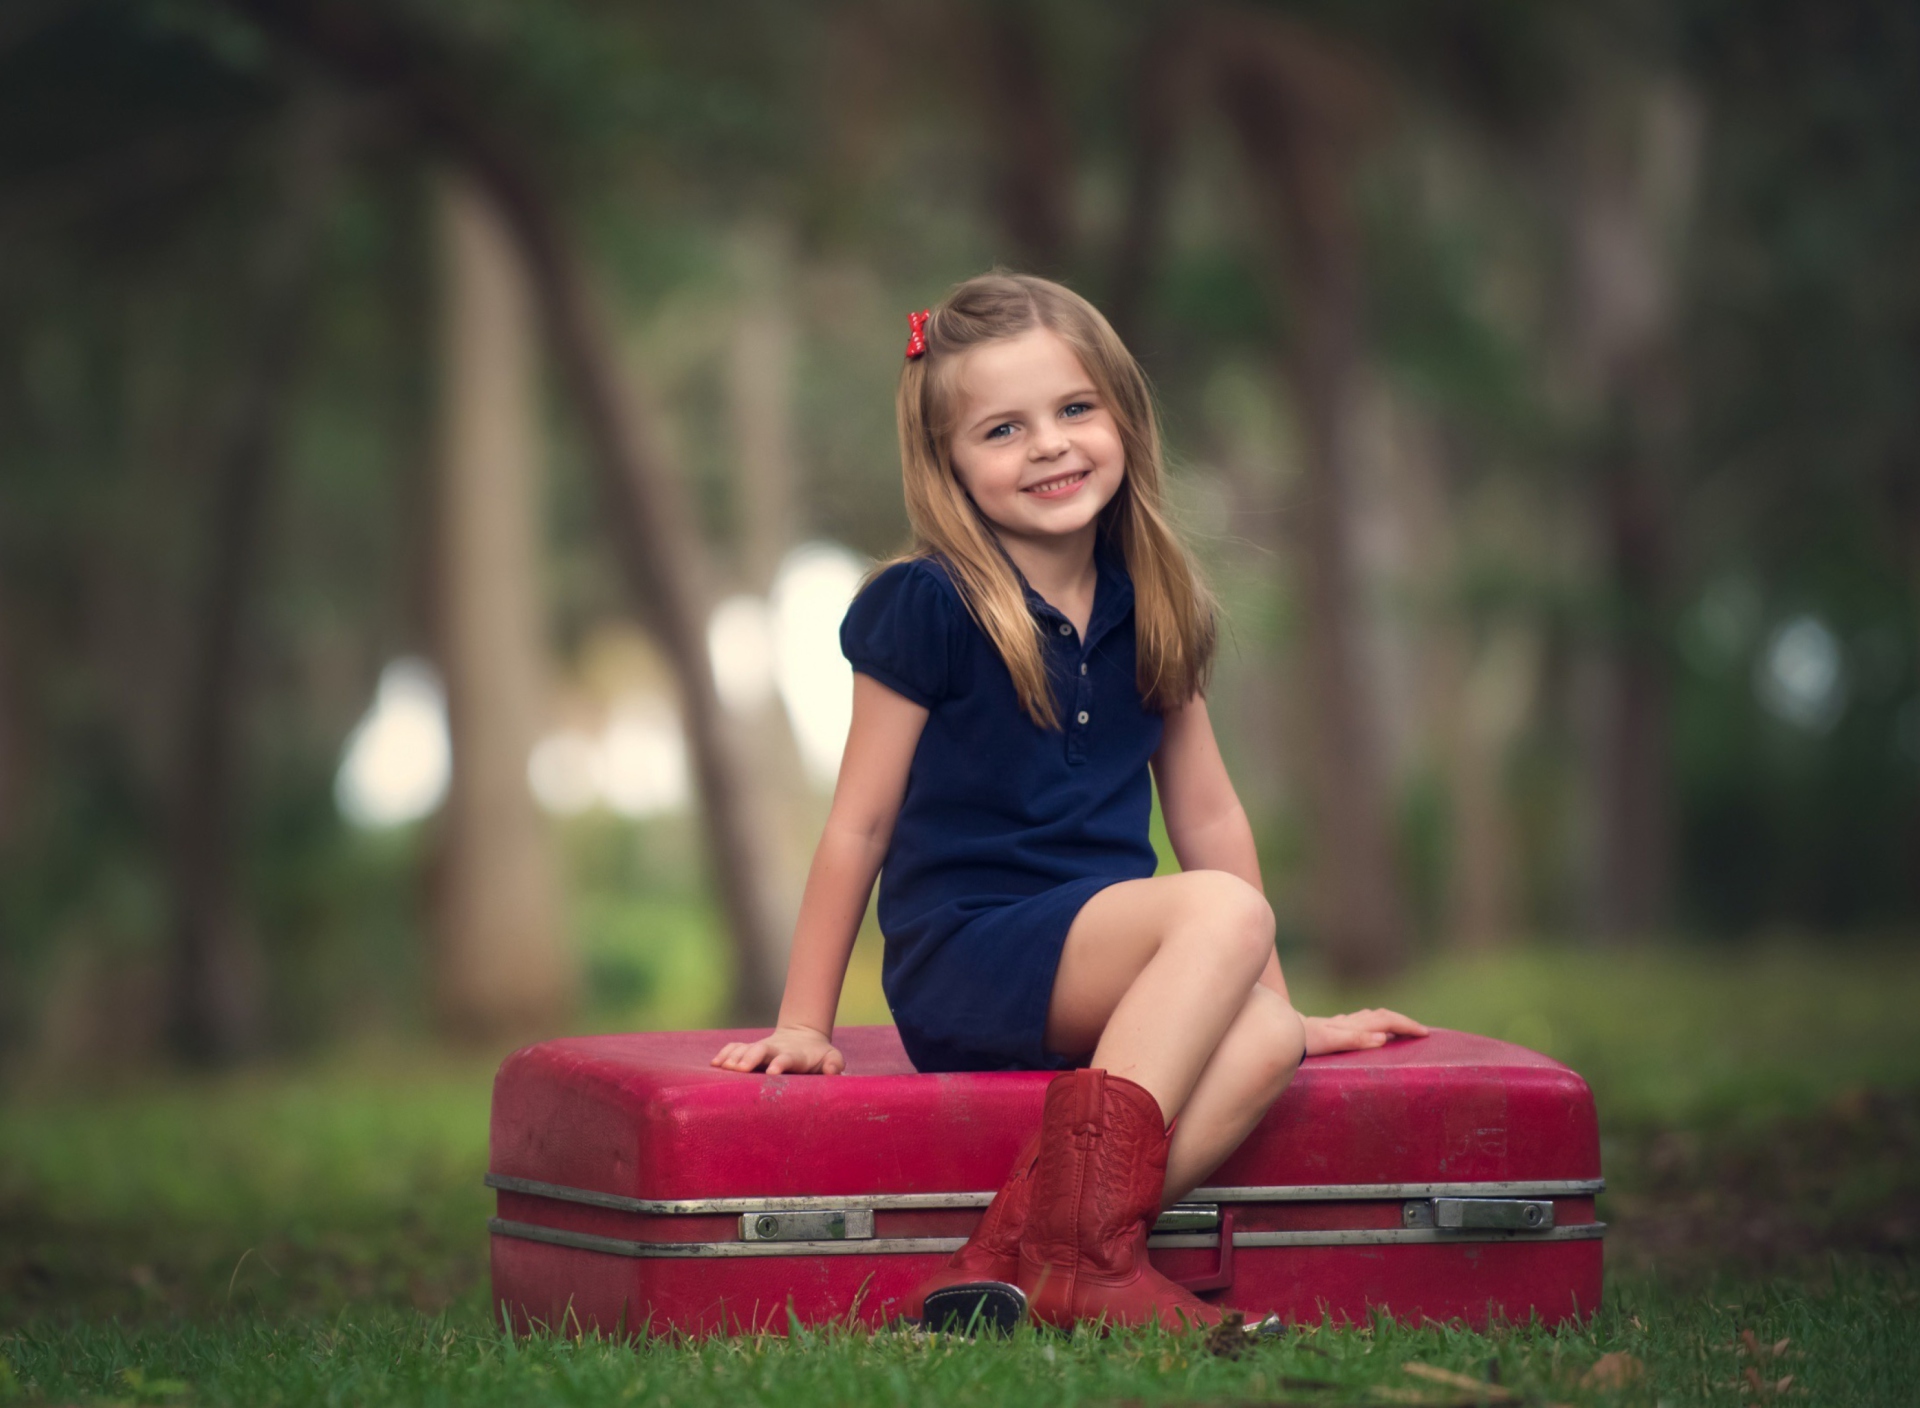 Little Girl Sitting On Red Suitcase screenshot #1 1920x1408